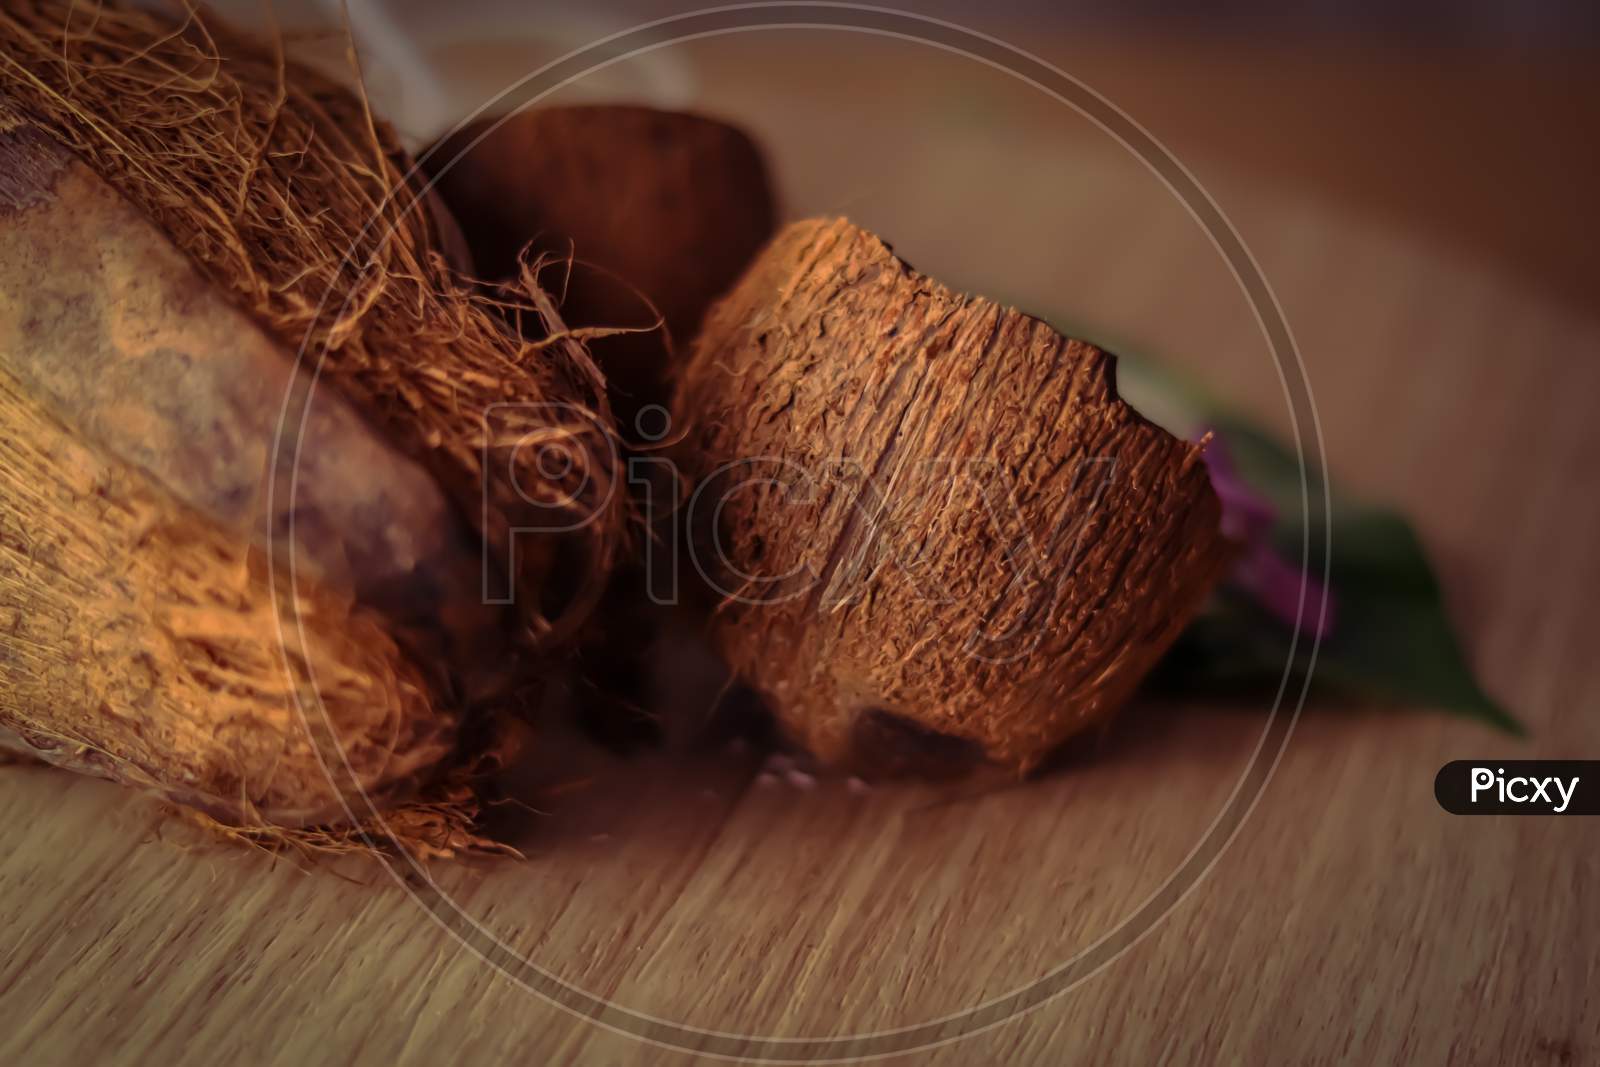 Healthy Coconut Milk With Whole Nut, Whole Coconut And Coconut Milk With Coconut Powder On Wooden Table,Fresh Nariyal Hd Footage ,Selective Focus On Subject,